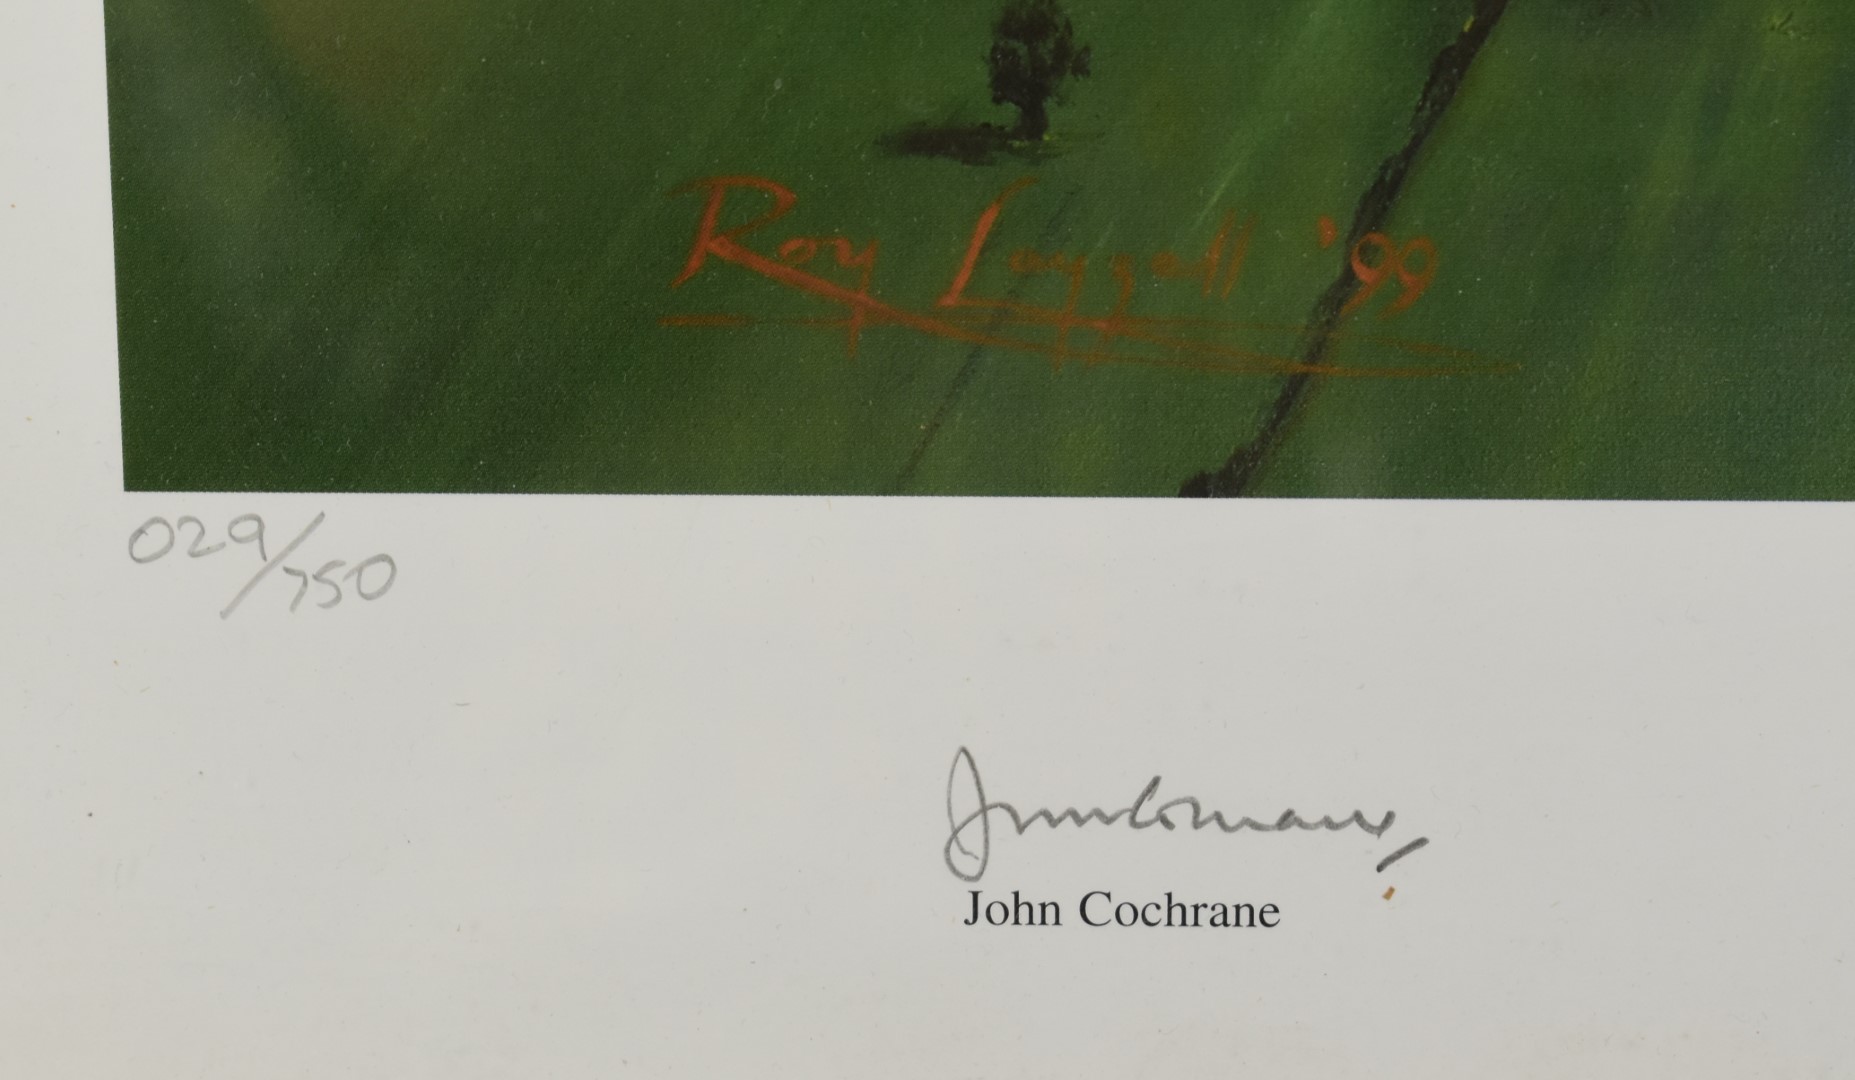 Roy Layzell Concorde signed print '002 airborne', signed to the margin by John Cochrane and Brian - Image 4 of 5